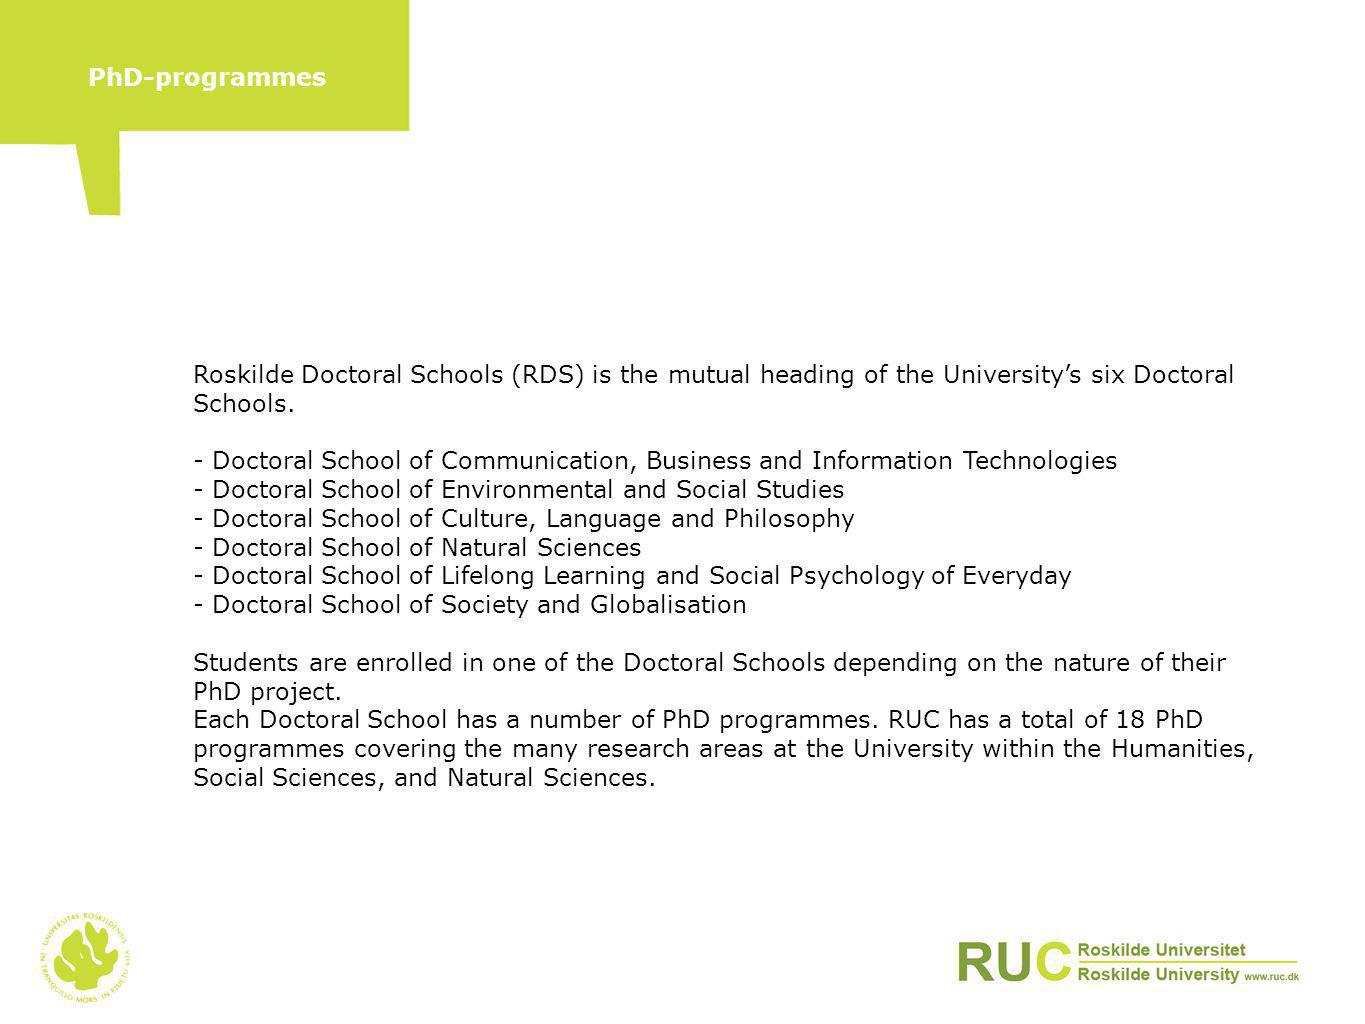 Roskilde Doctoral Schools (RDS) is the mutual heading of the University’s six Doctoral Schools.